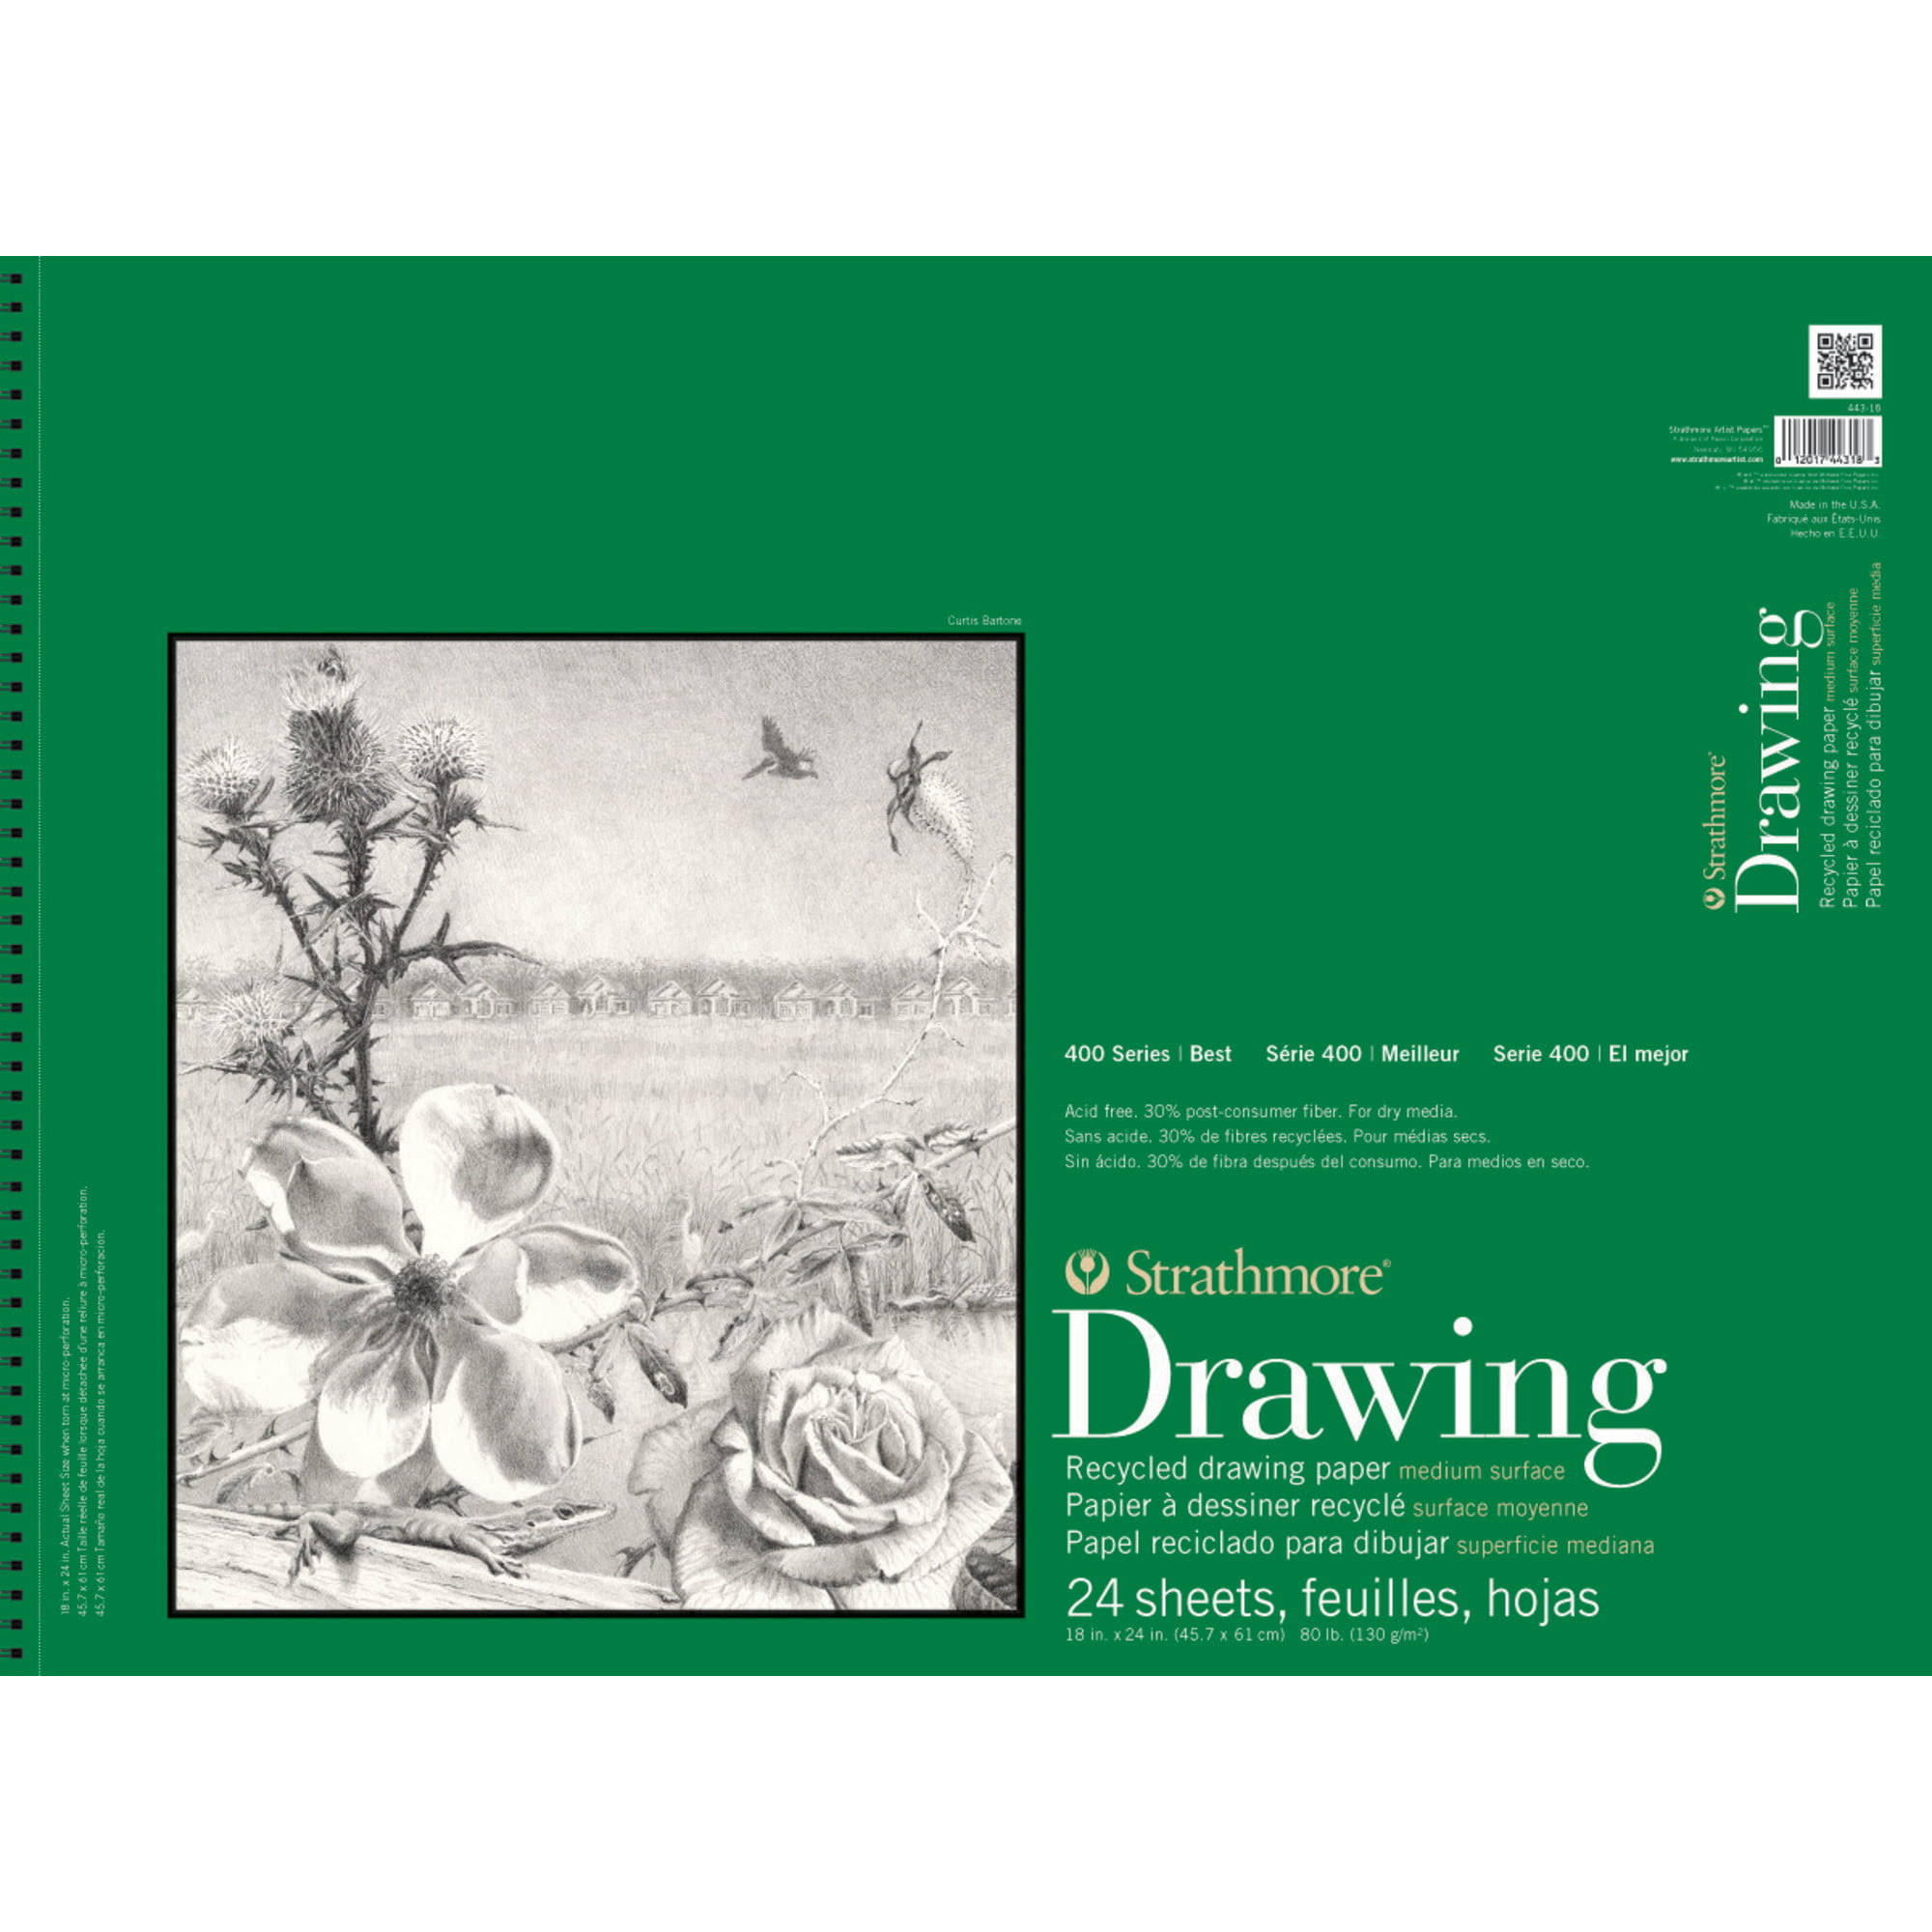 Strathmore Recycled Drawing Spiral Paper Pad - 18" x 24", 24 Sheets